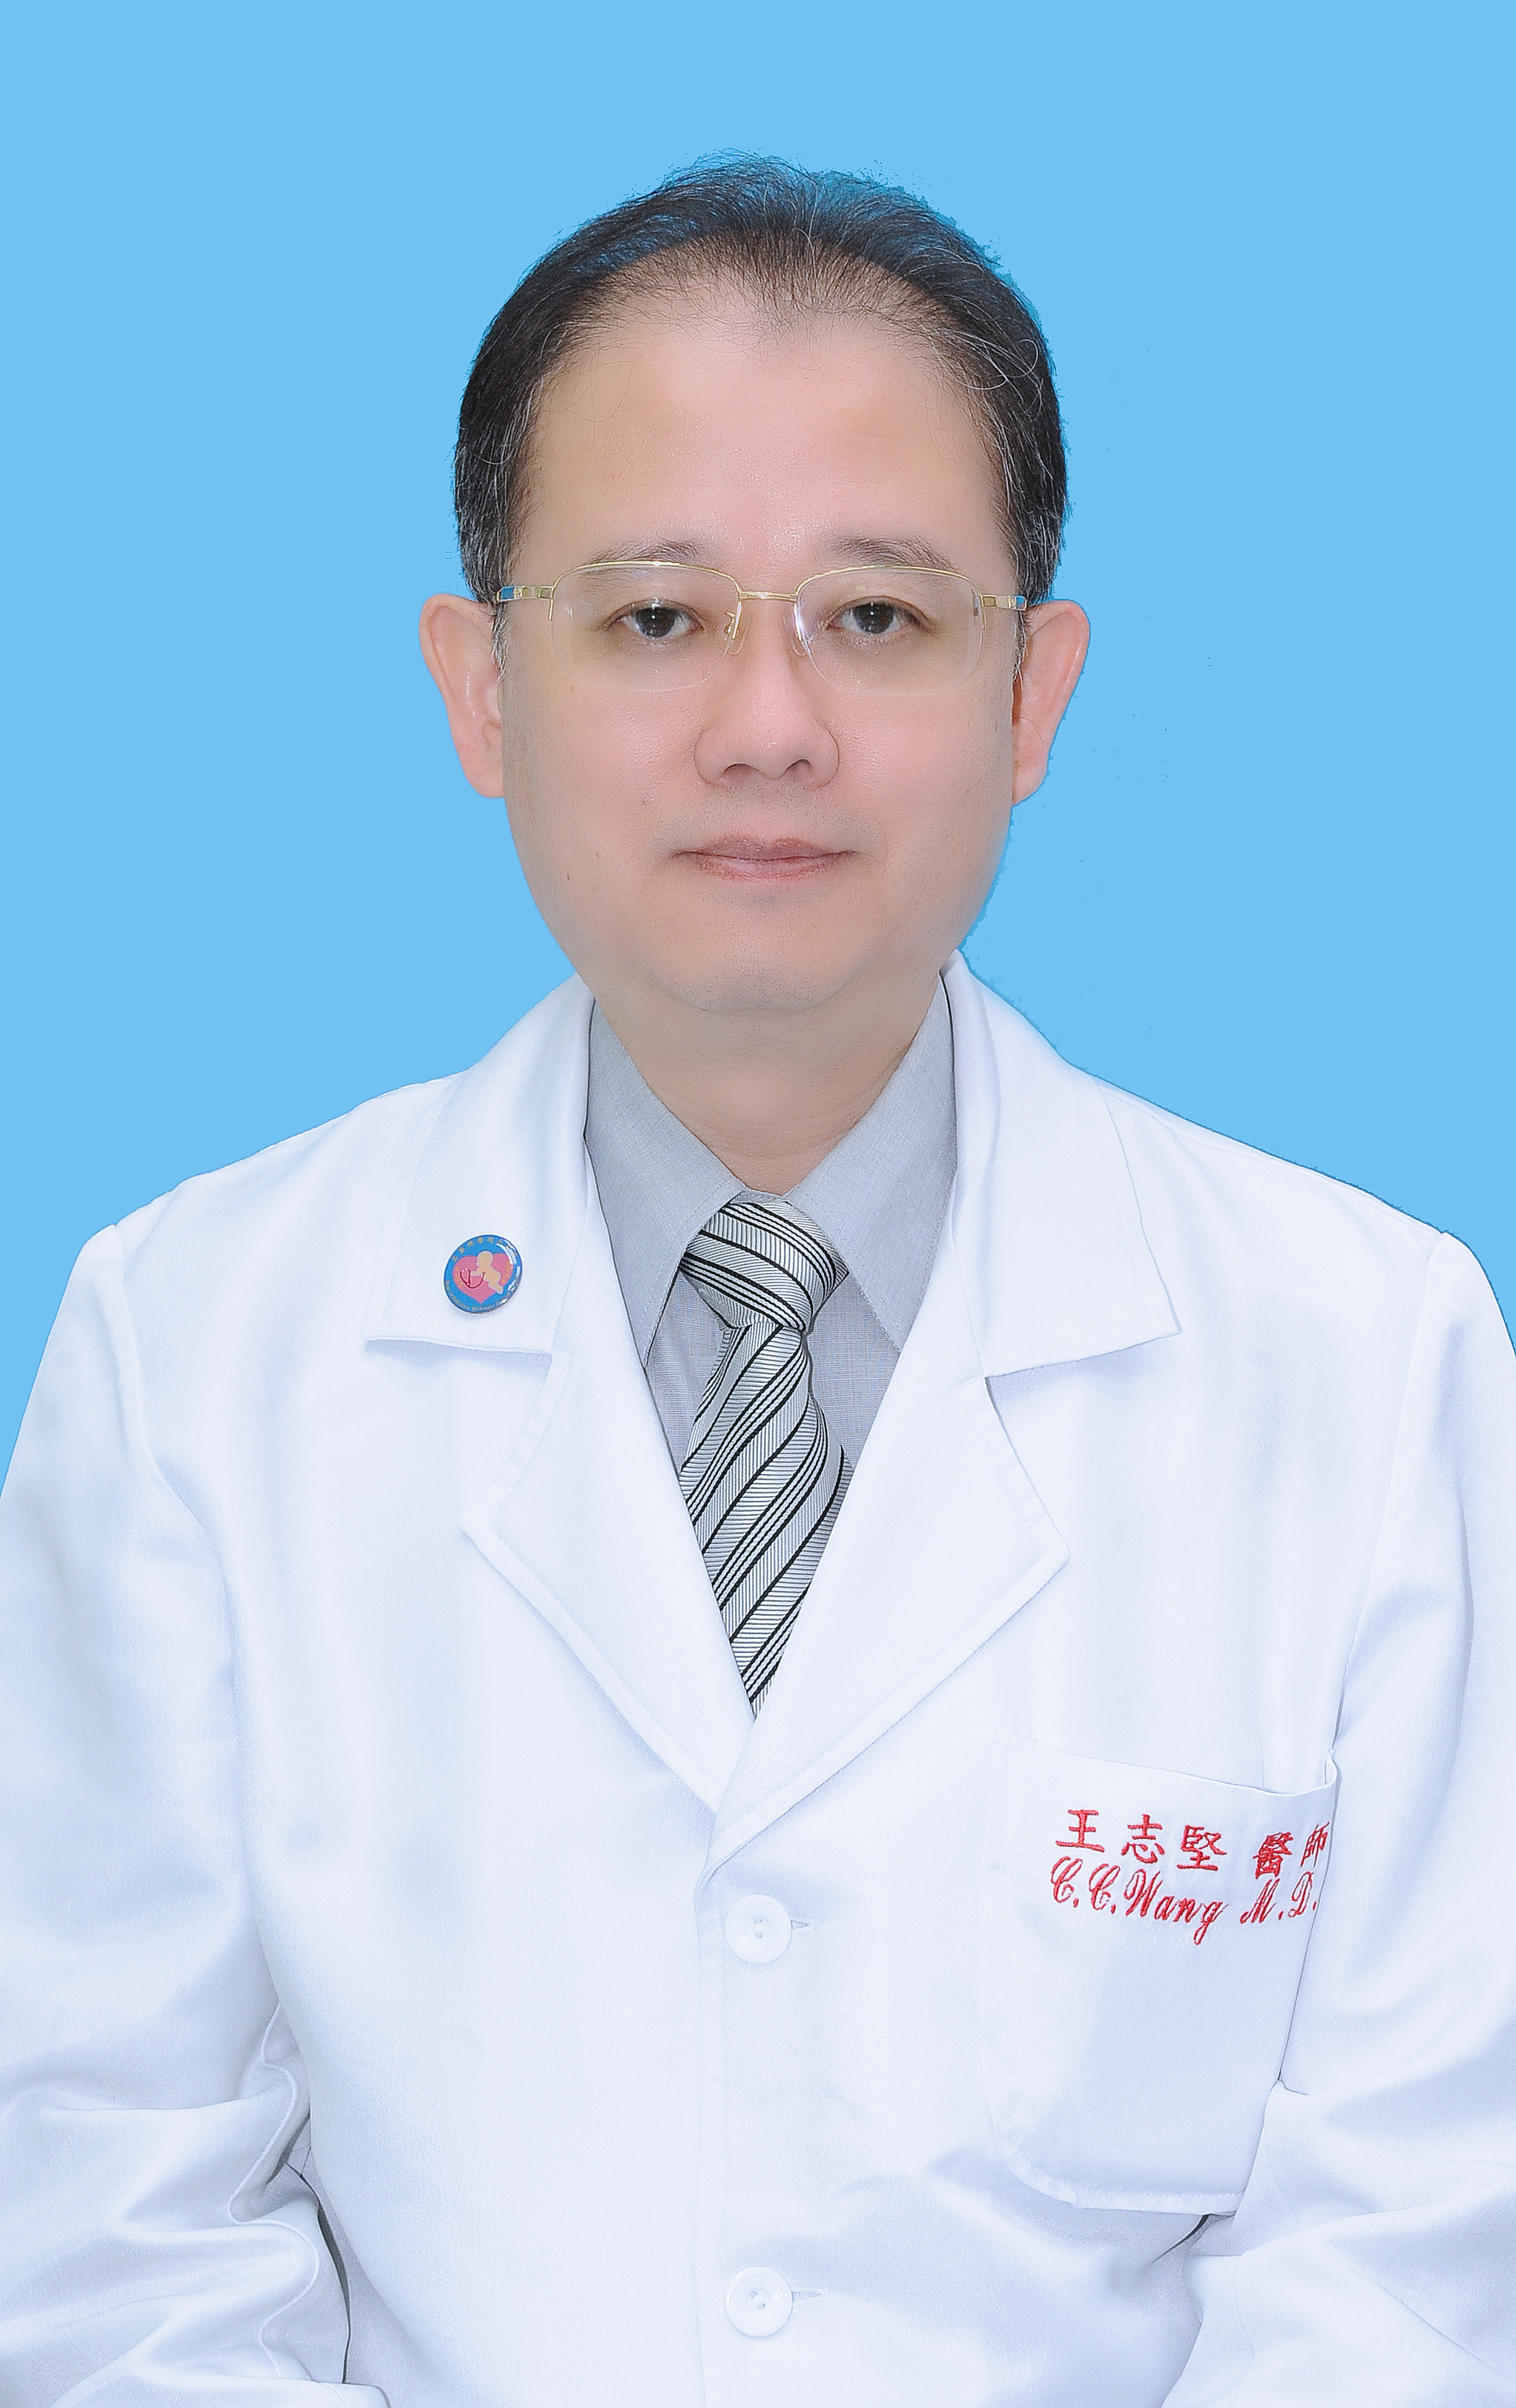 Chih-Chien,Wang Division of Pediatric Infection